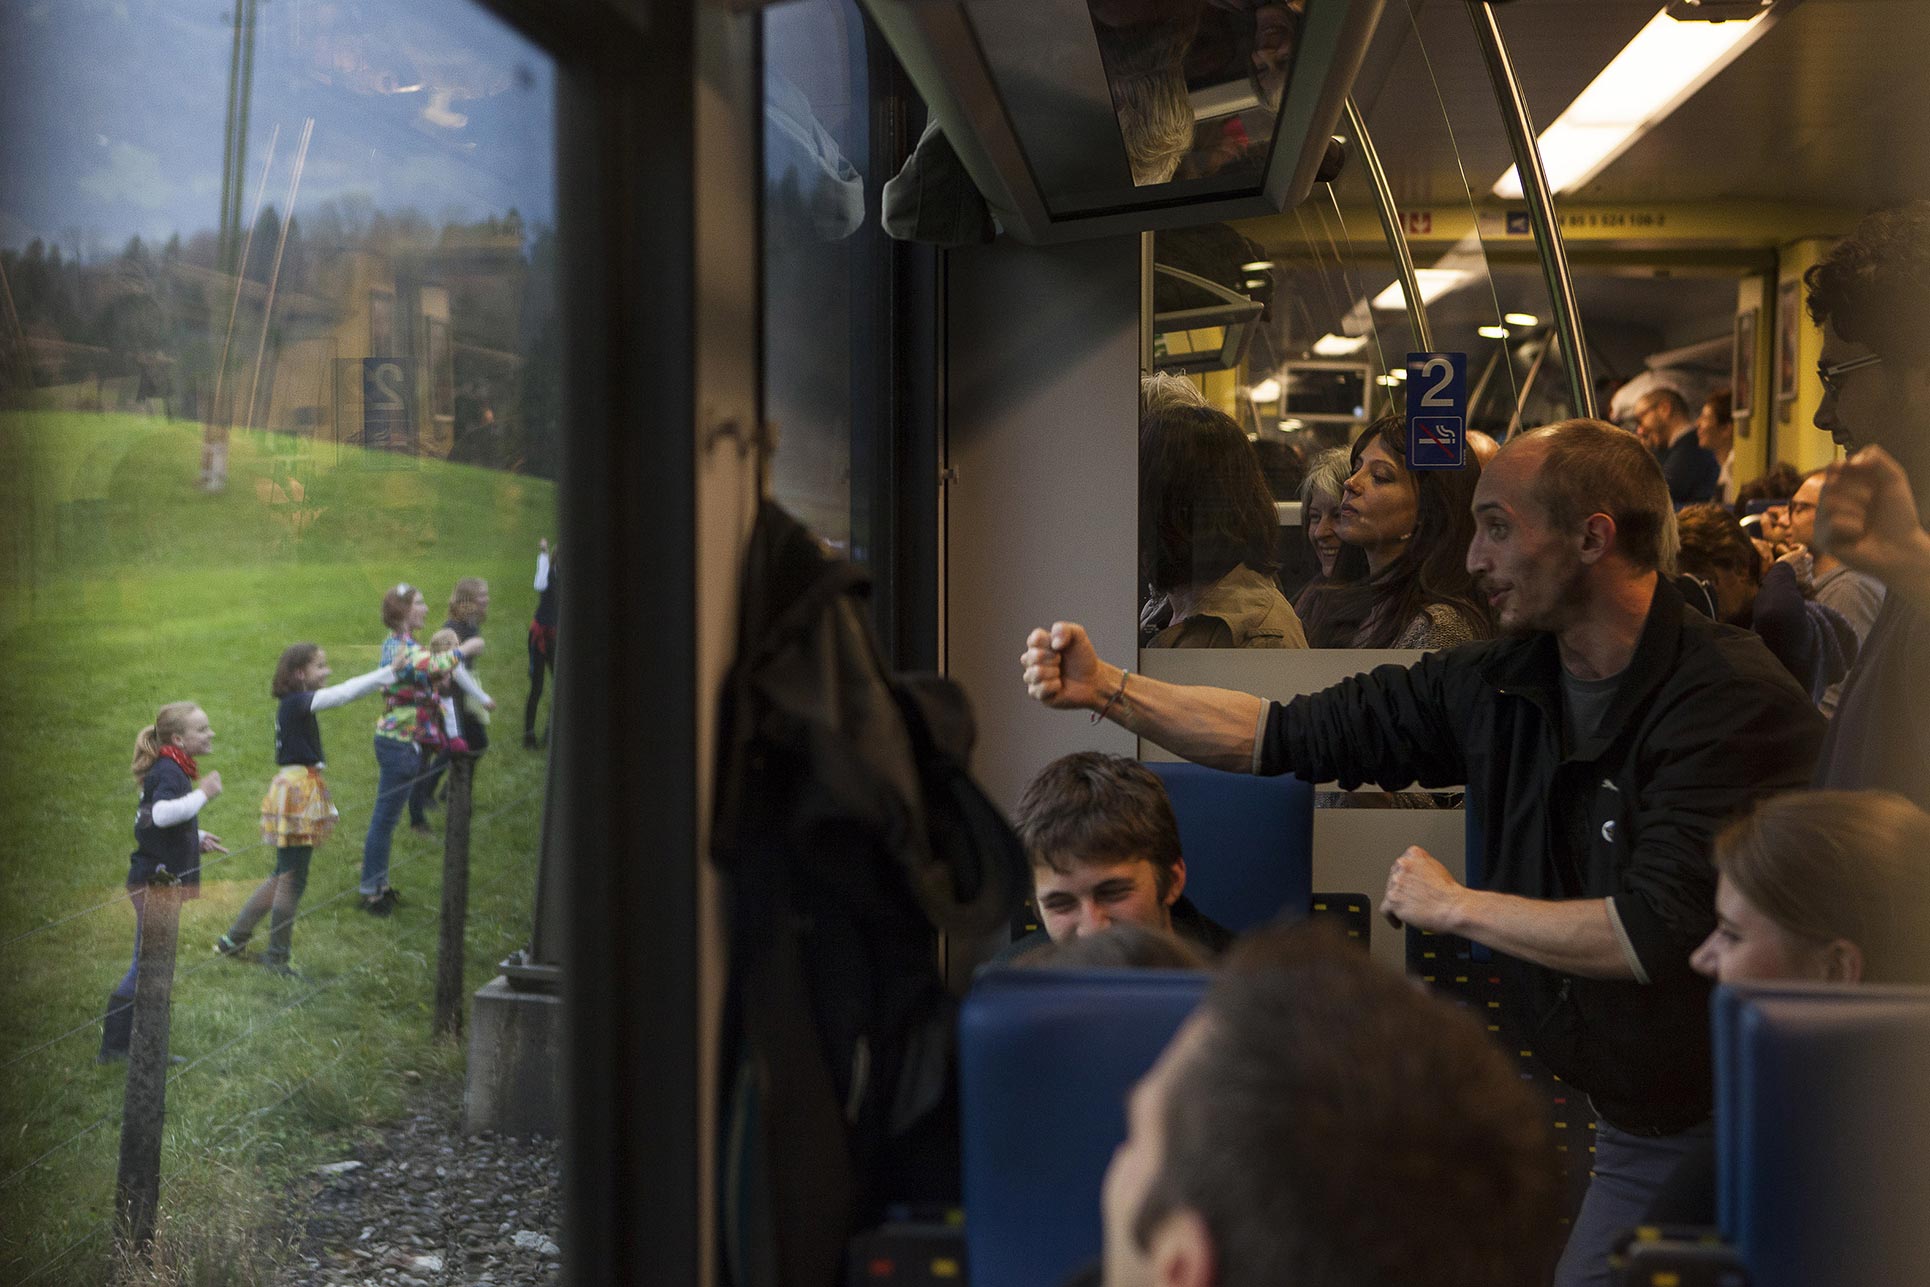 Blauring Altdorf, playing rock-paper-scissors through the train's window with the Performance-Train passengers while the train stands still (Photo: Carolina Farina)